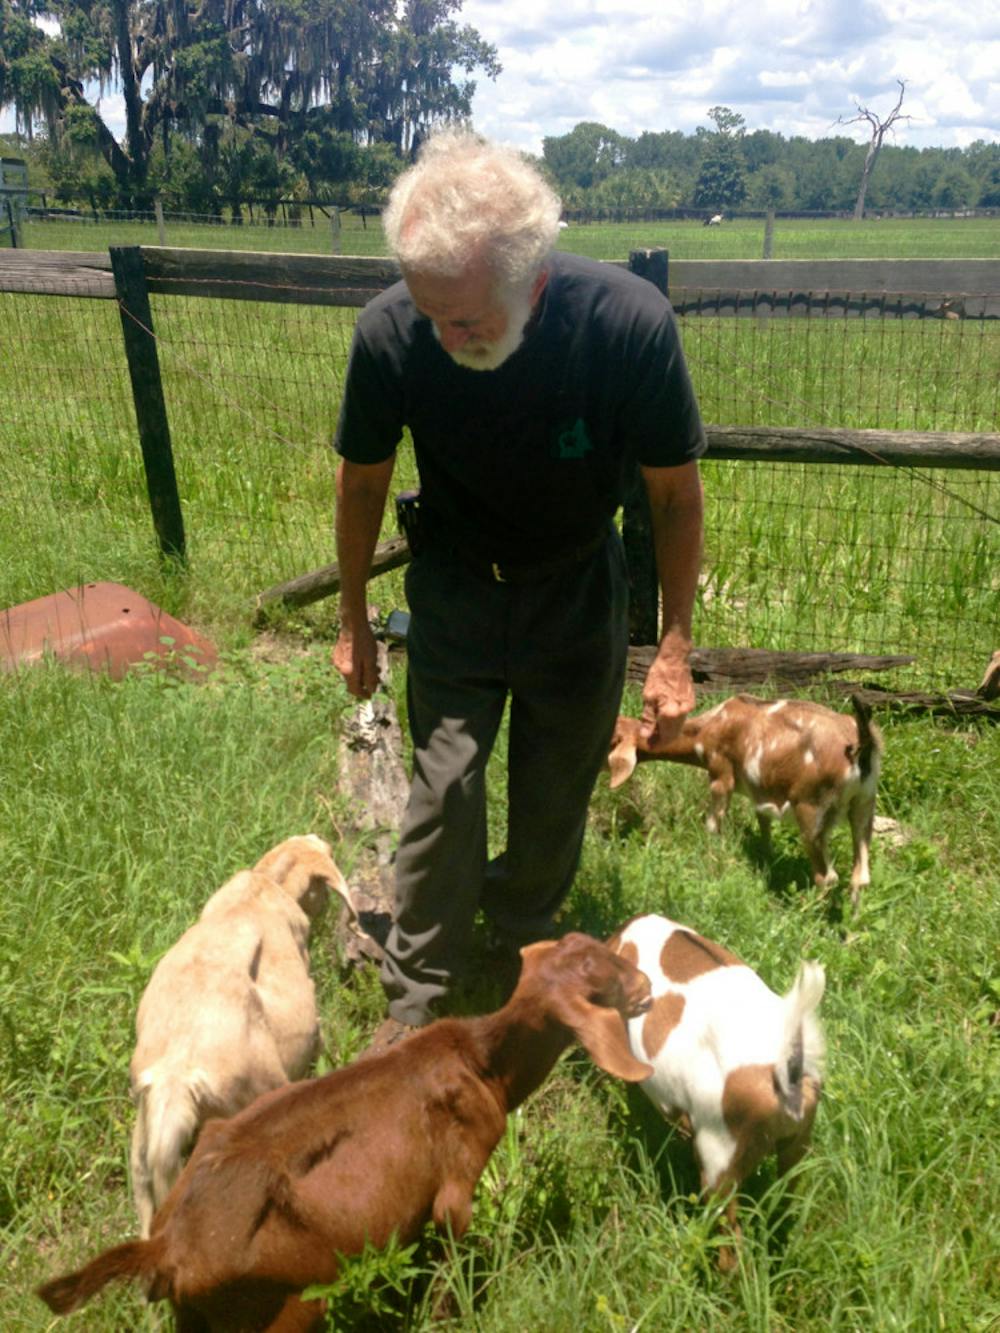 <p>Charlie Meister tends to goats on his farm in Gainesville. Meister owns about 100 goats, 10 cows, 11 horses, 25 chickens, two roosters, five dogs and three donkeys.</p>